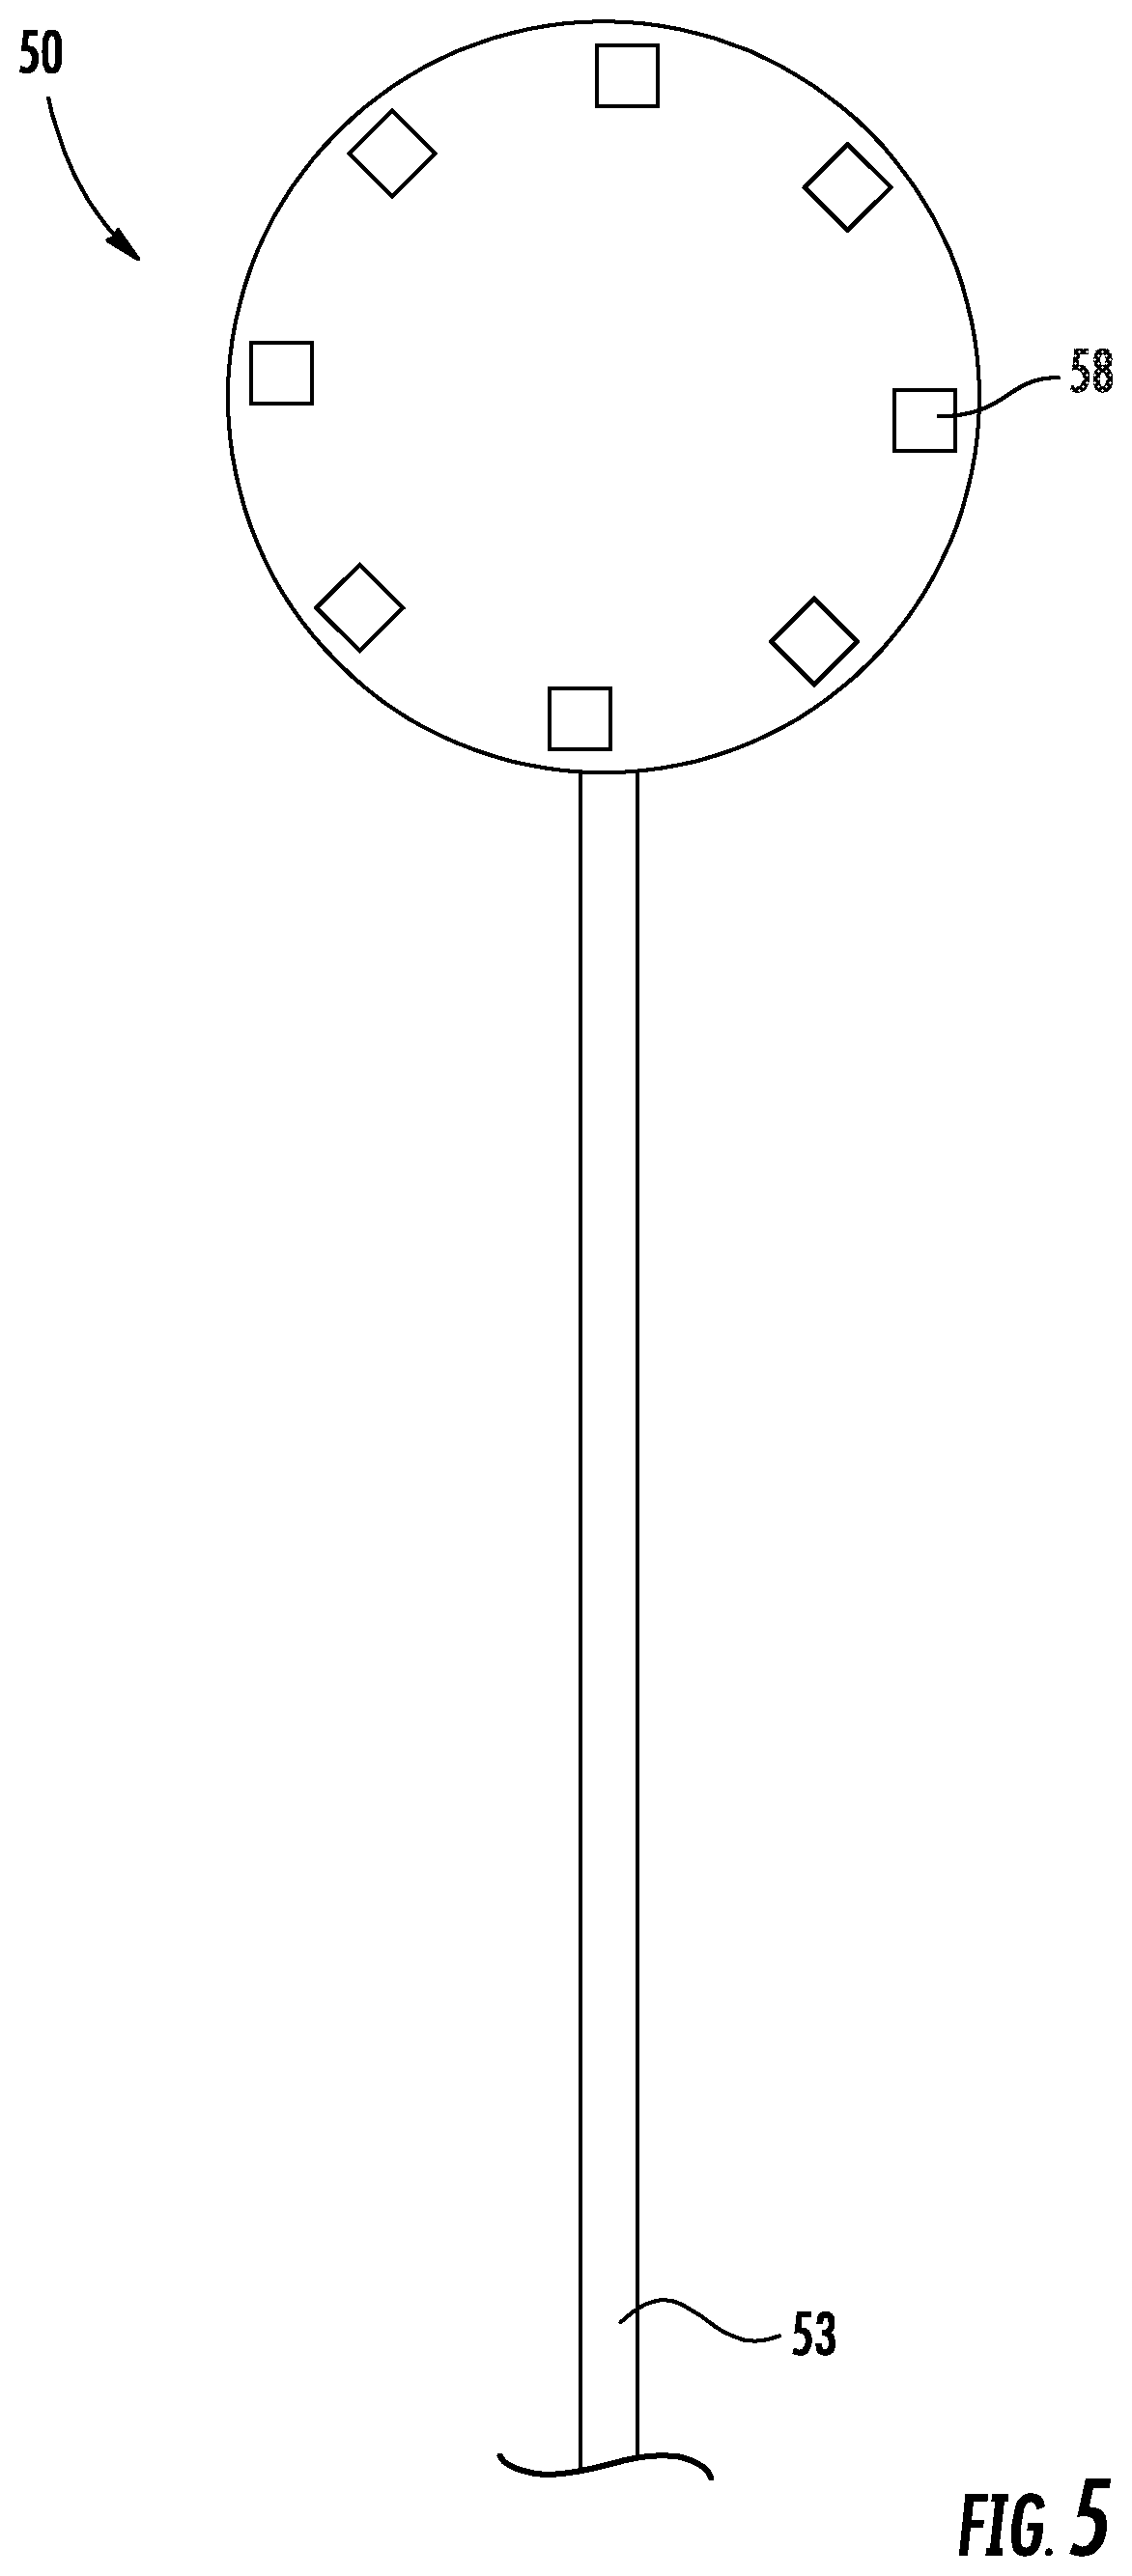 Implantable medication infusion port with physiologic monitoring